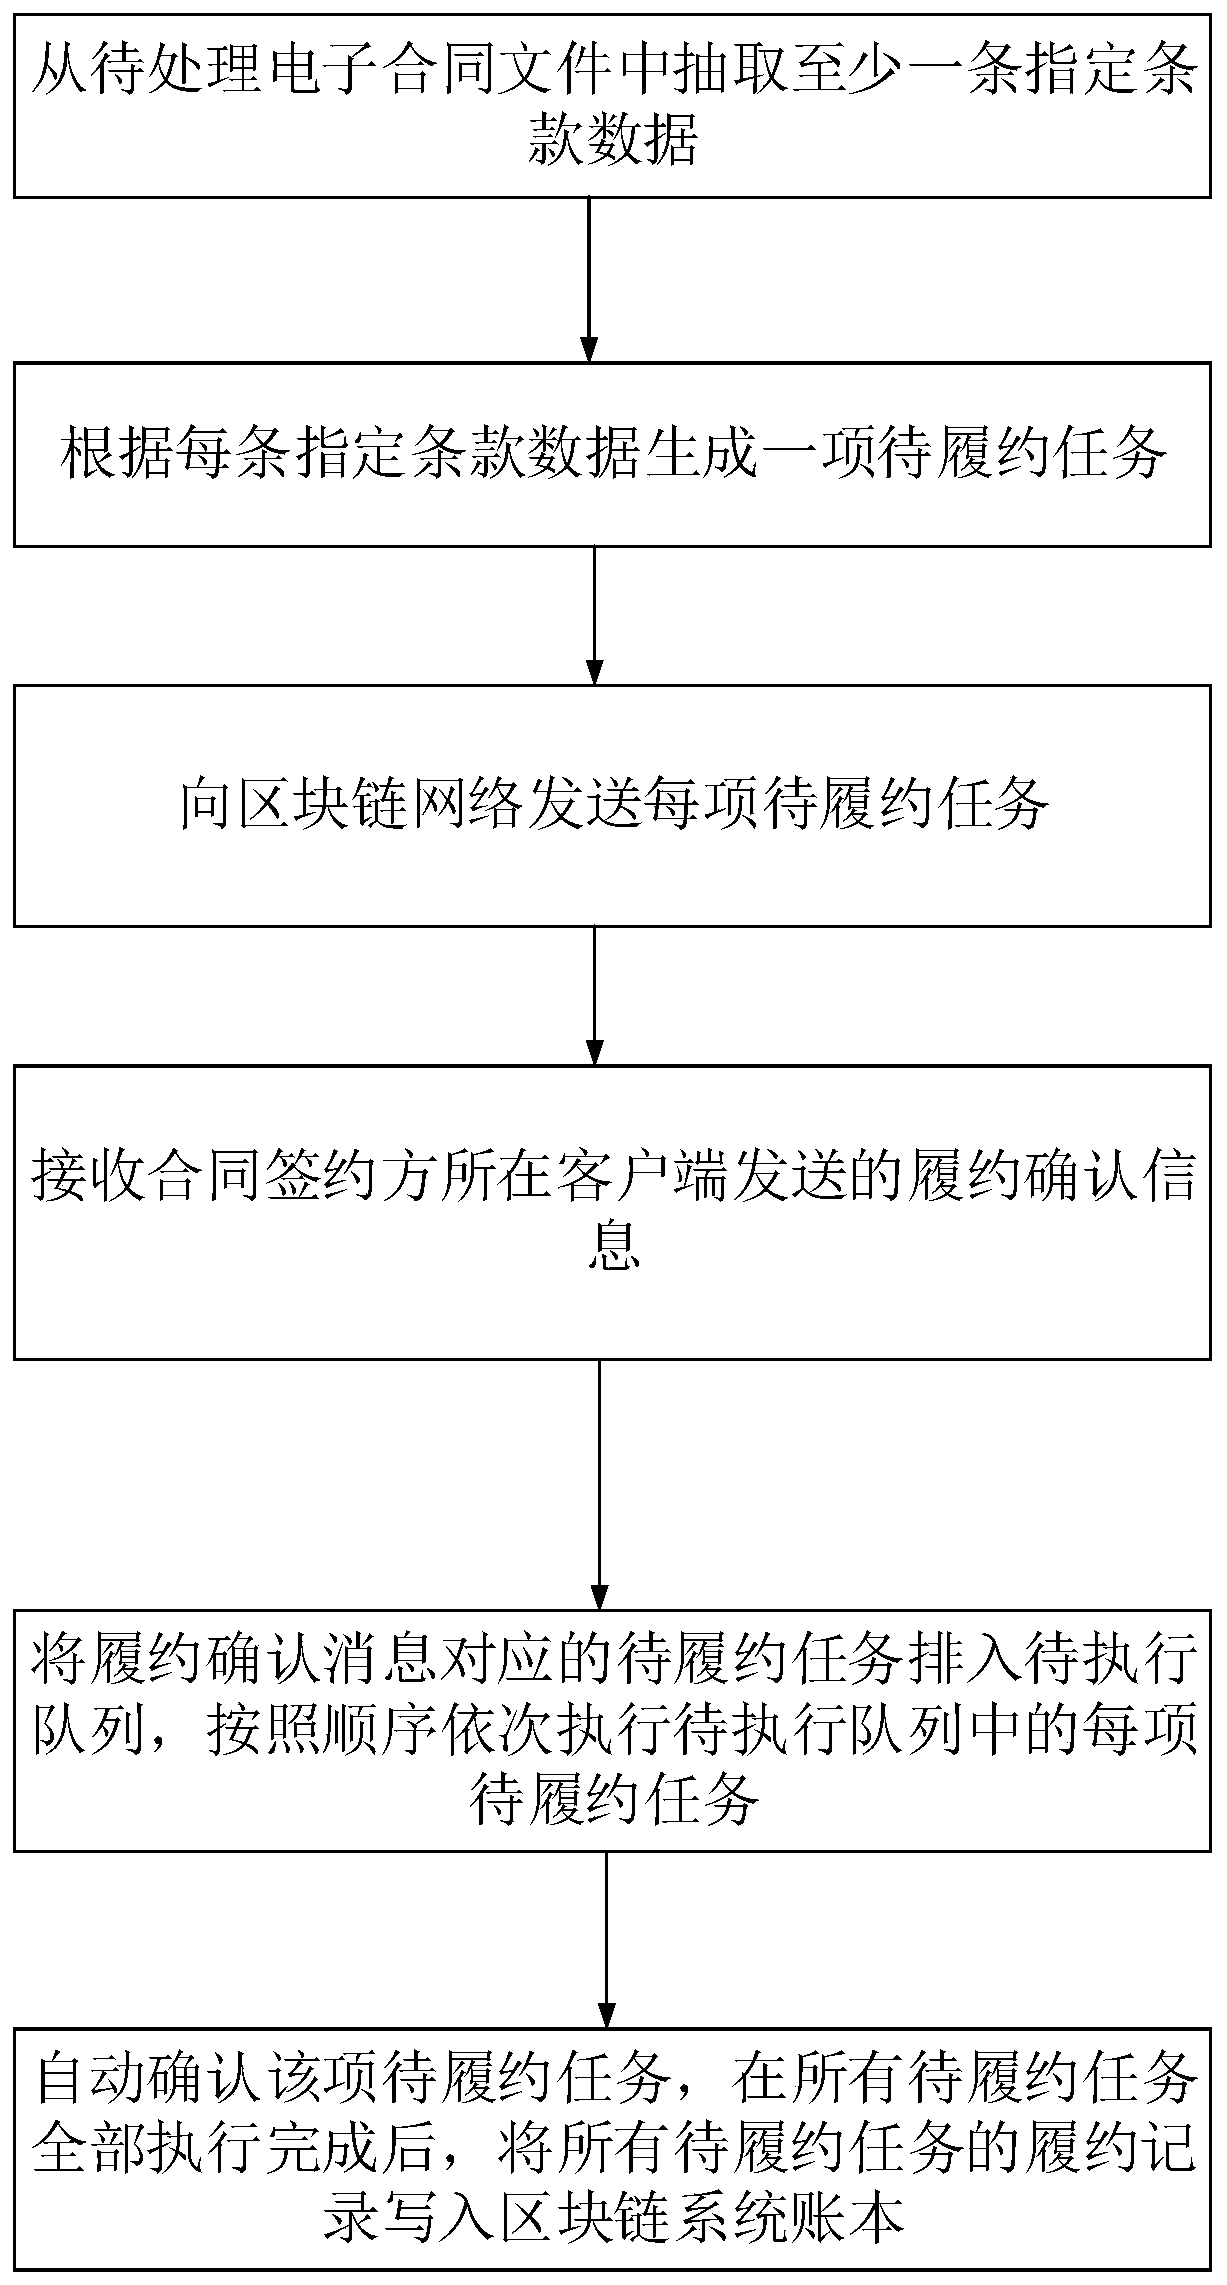 Electronic contract automatic performance processing method based on block chain